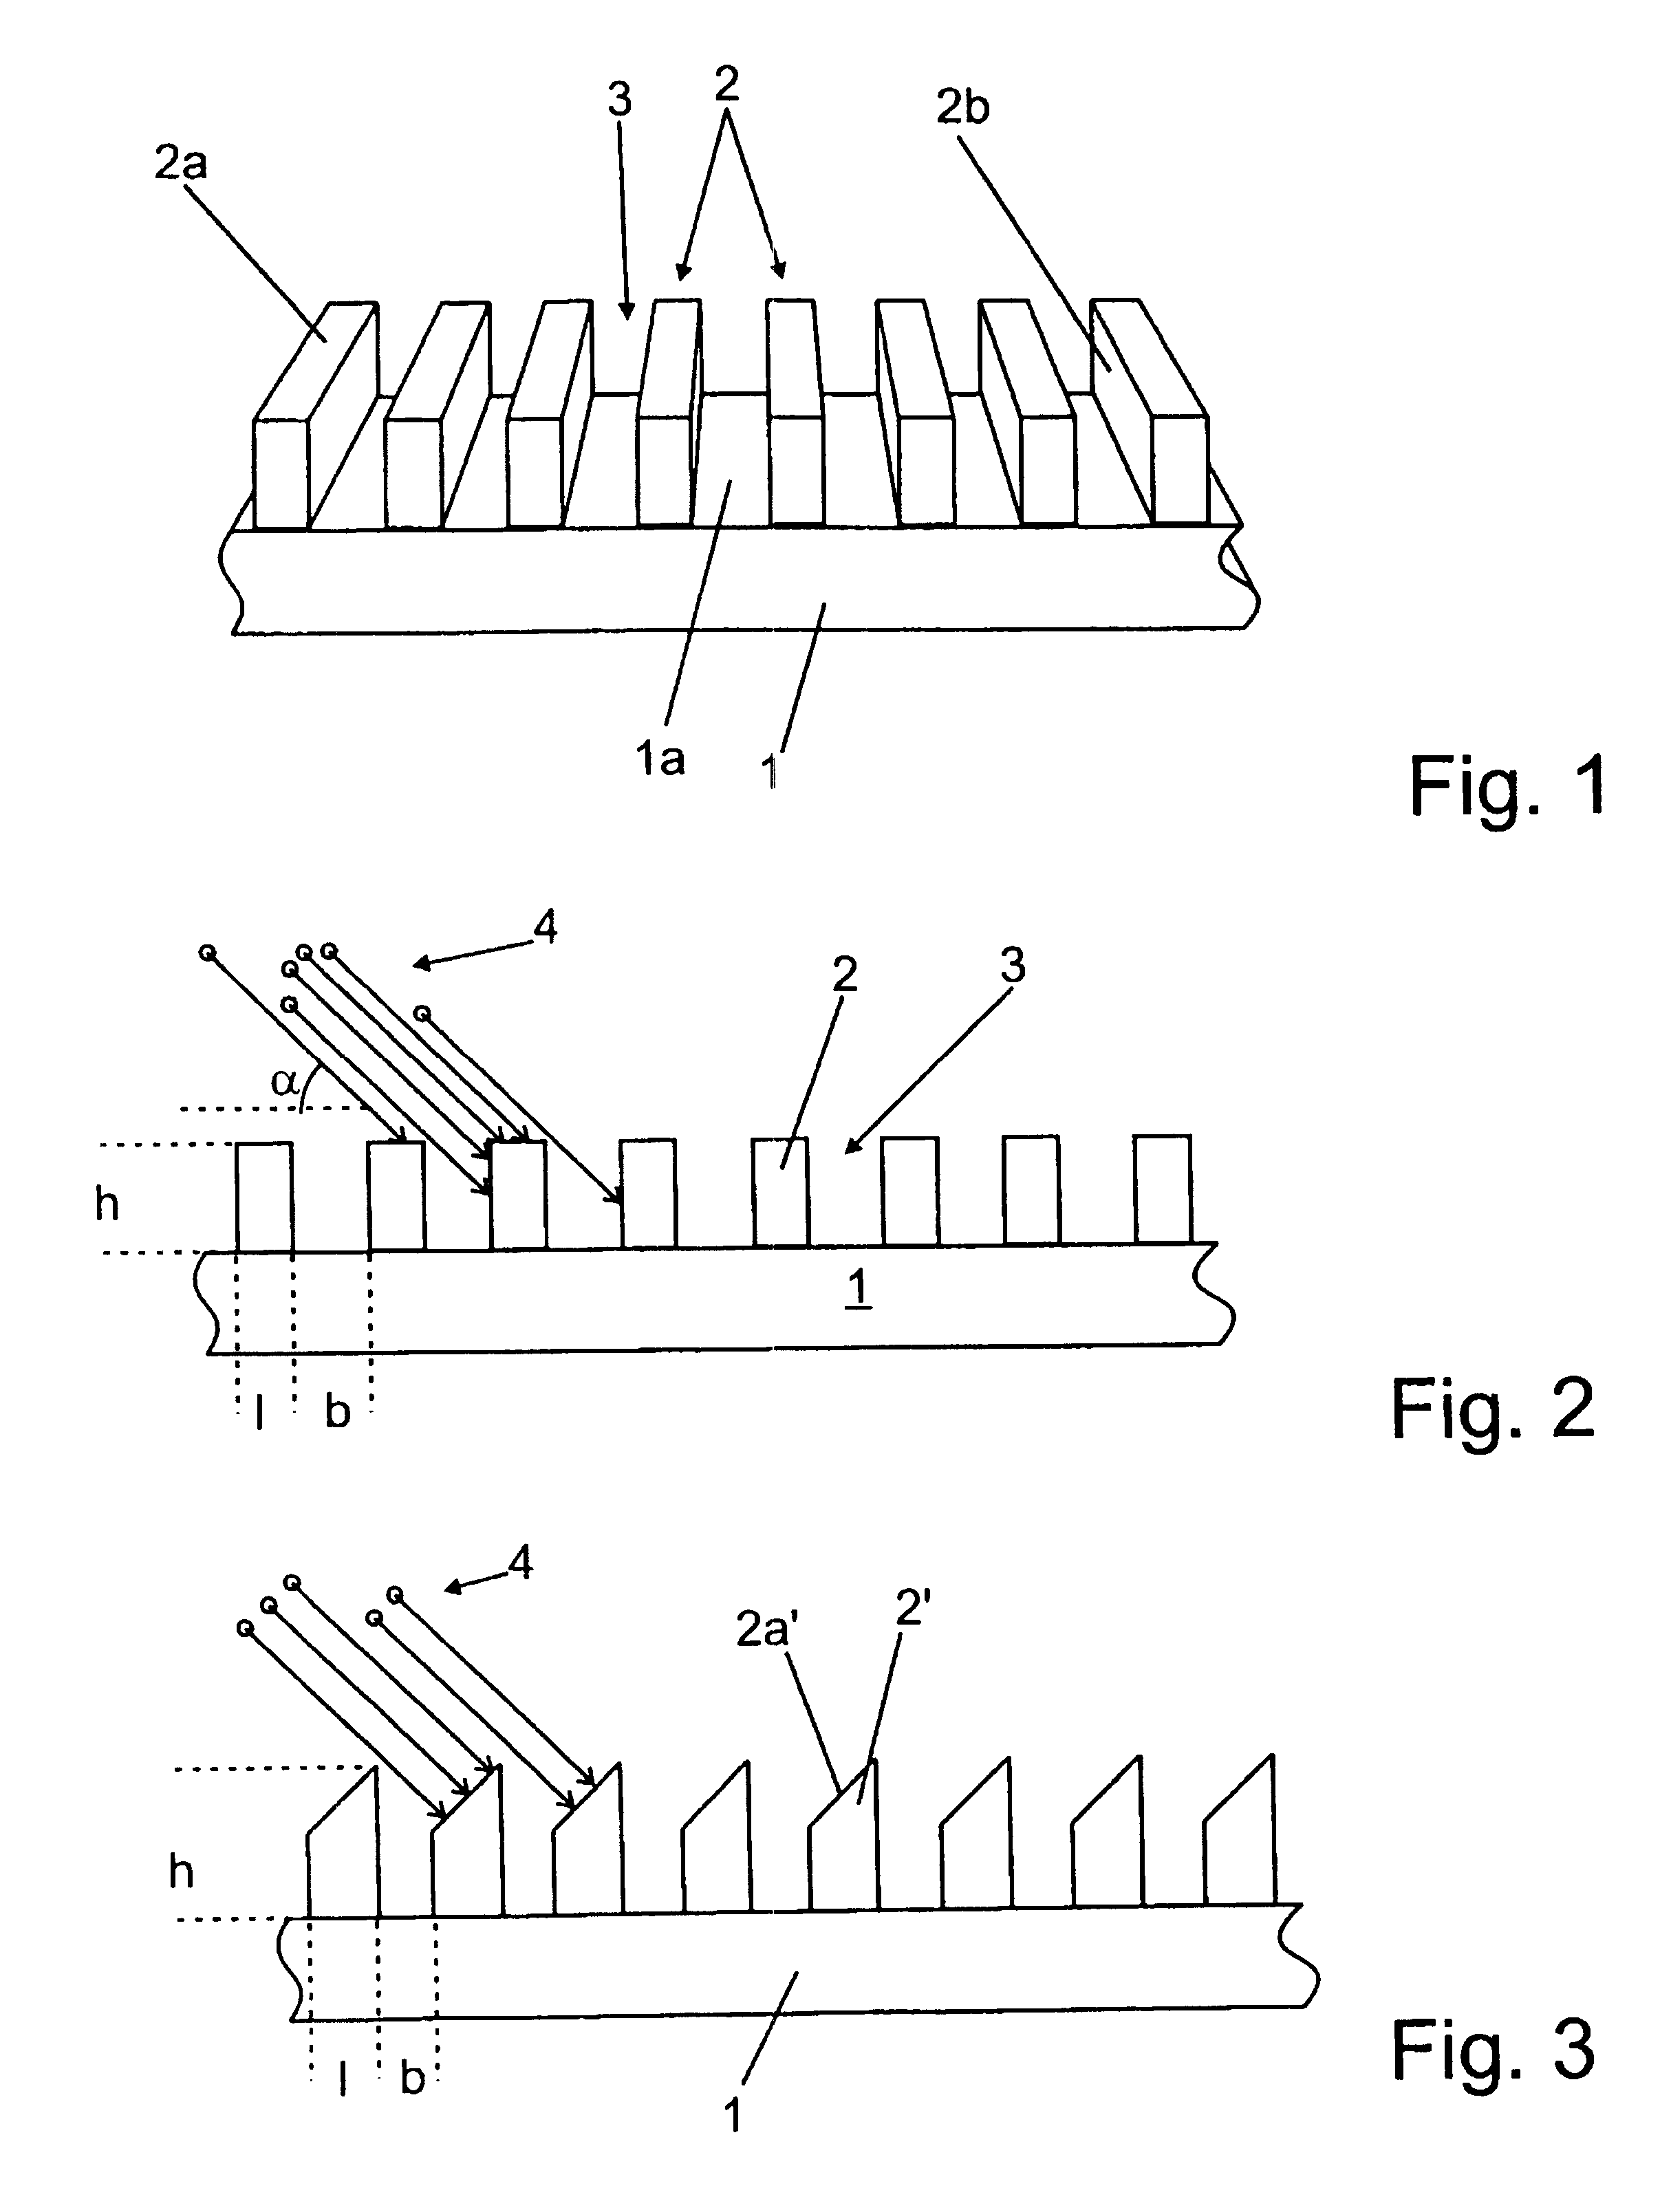 Apparatus for detecting particles